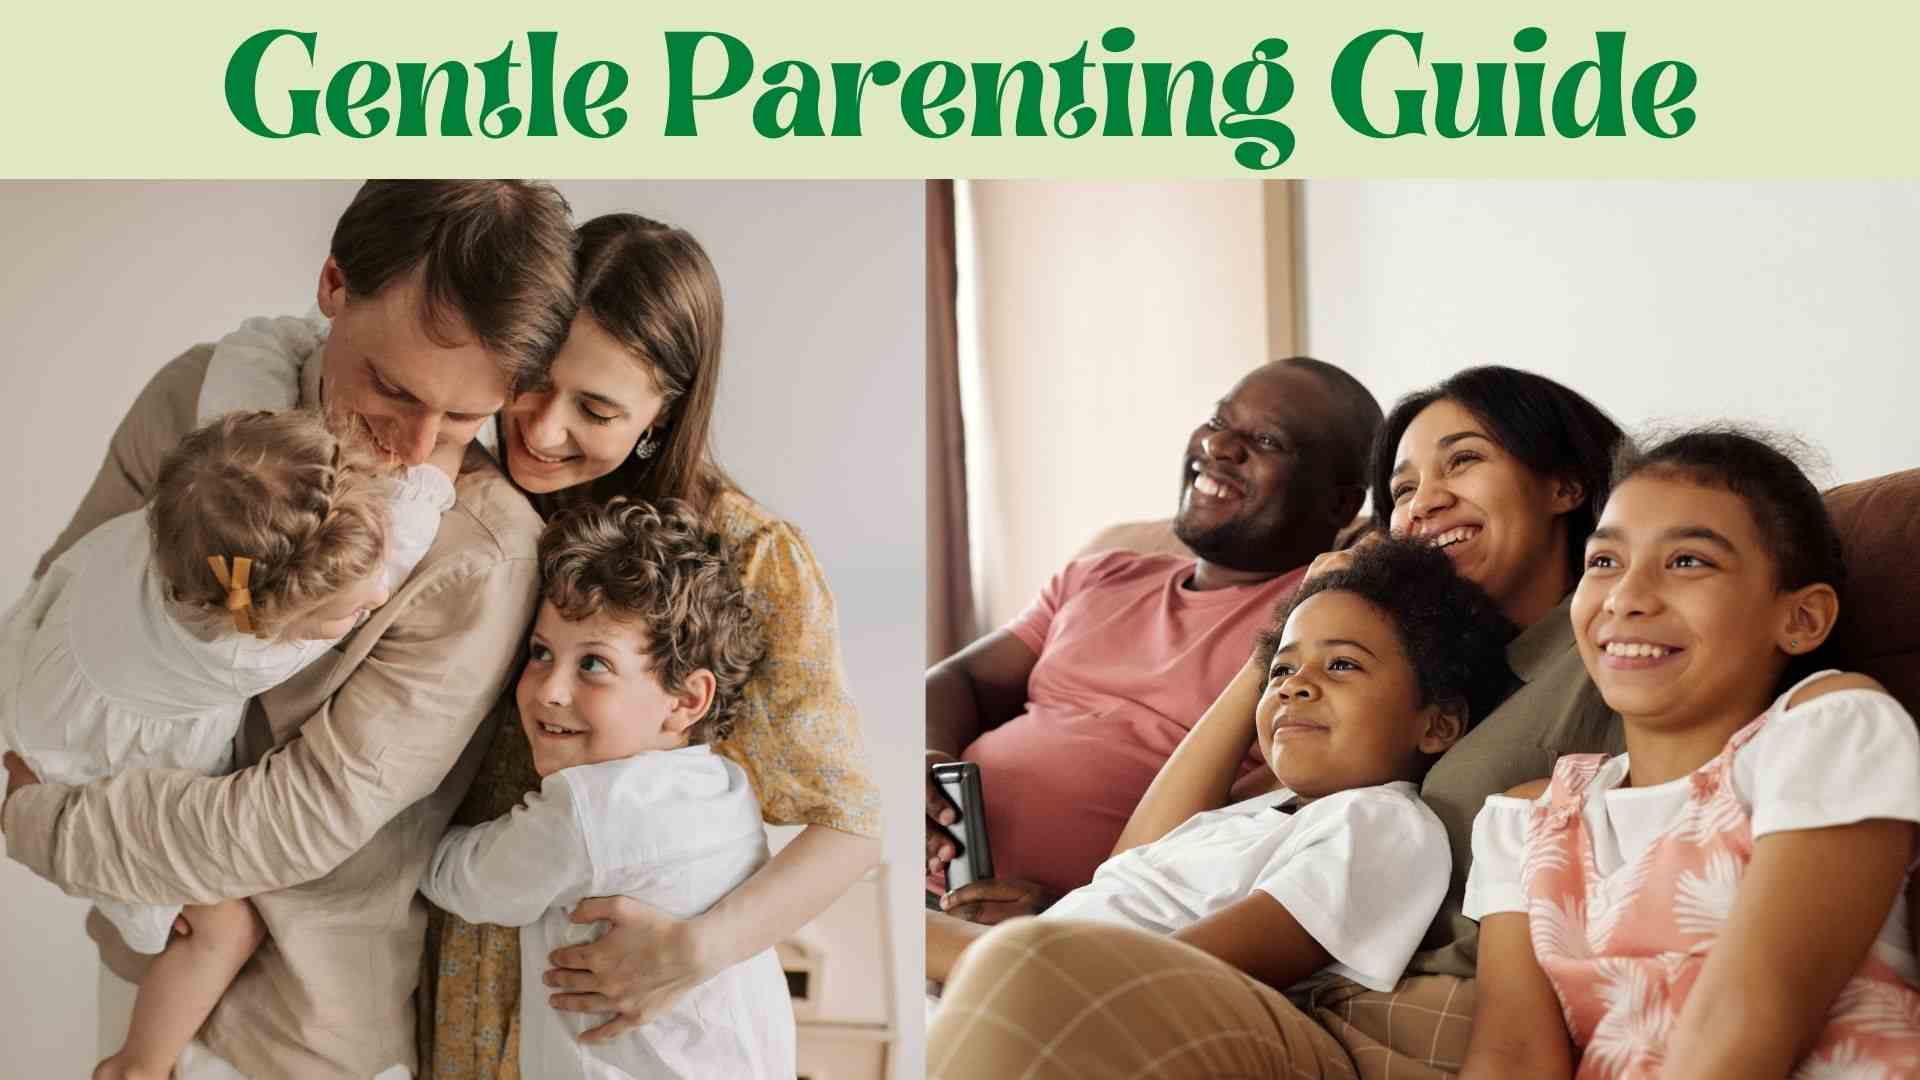 Gentle Parenting Guide wallpaper and images